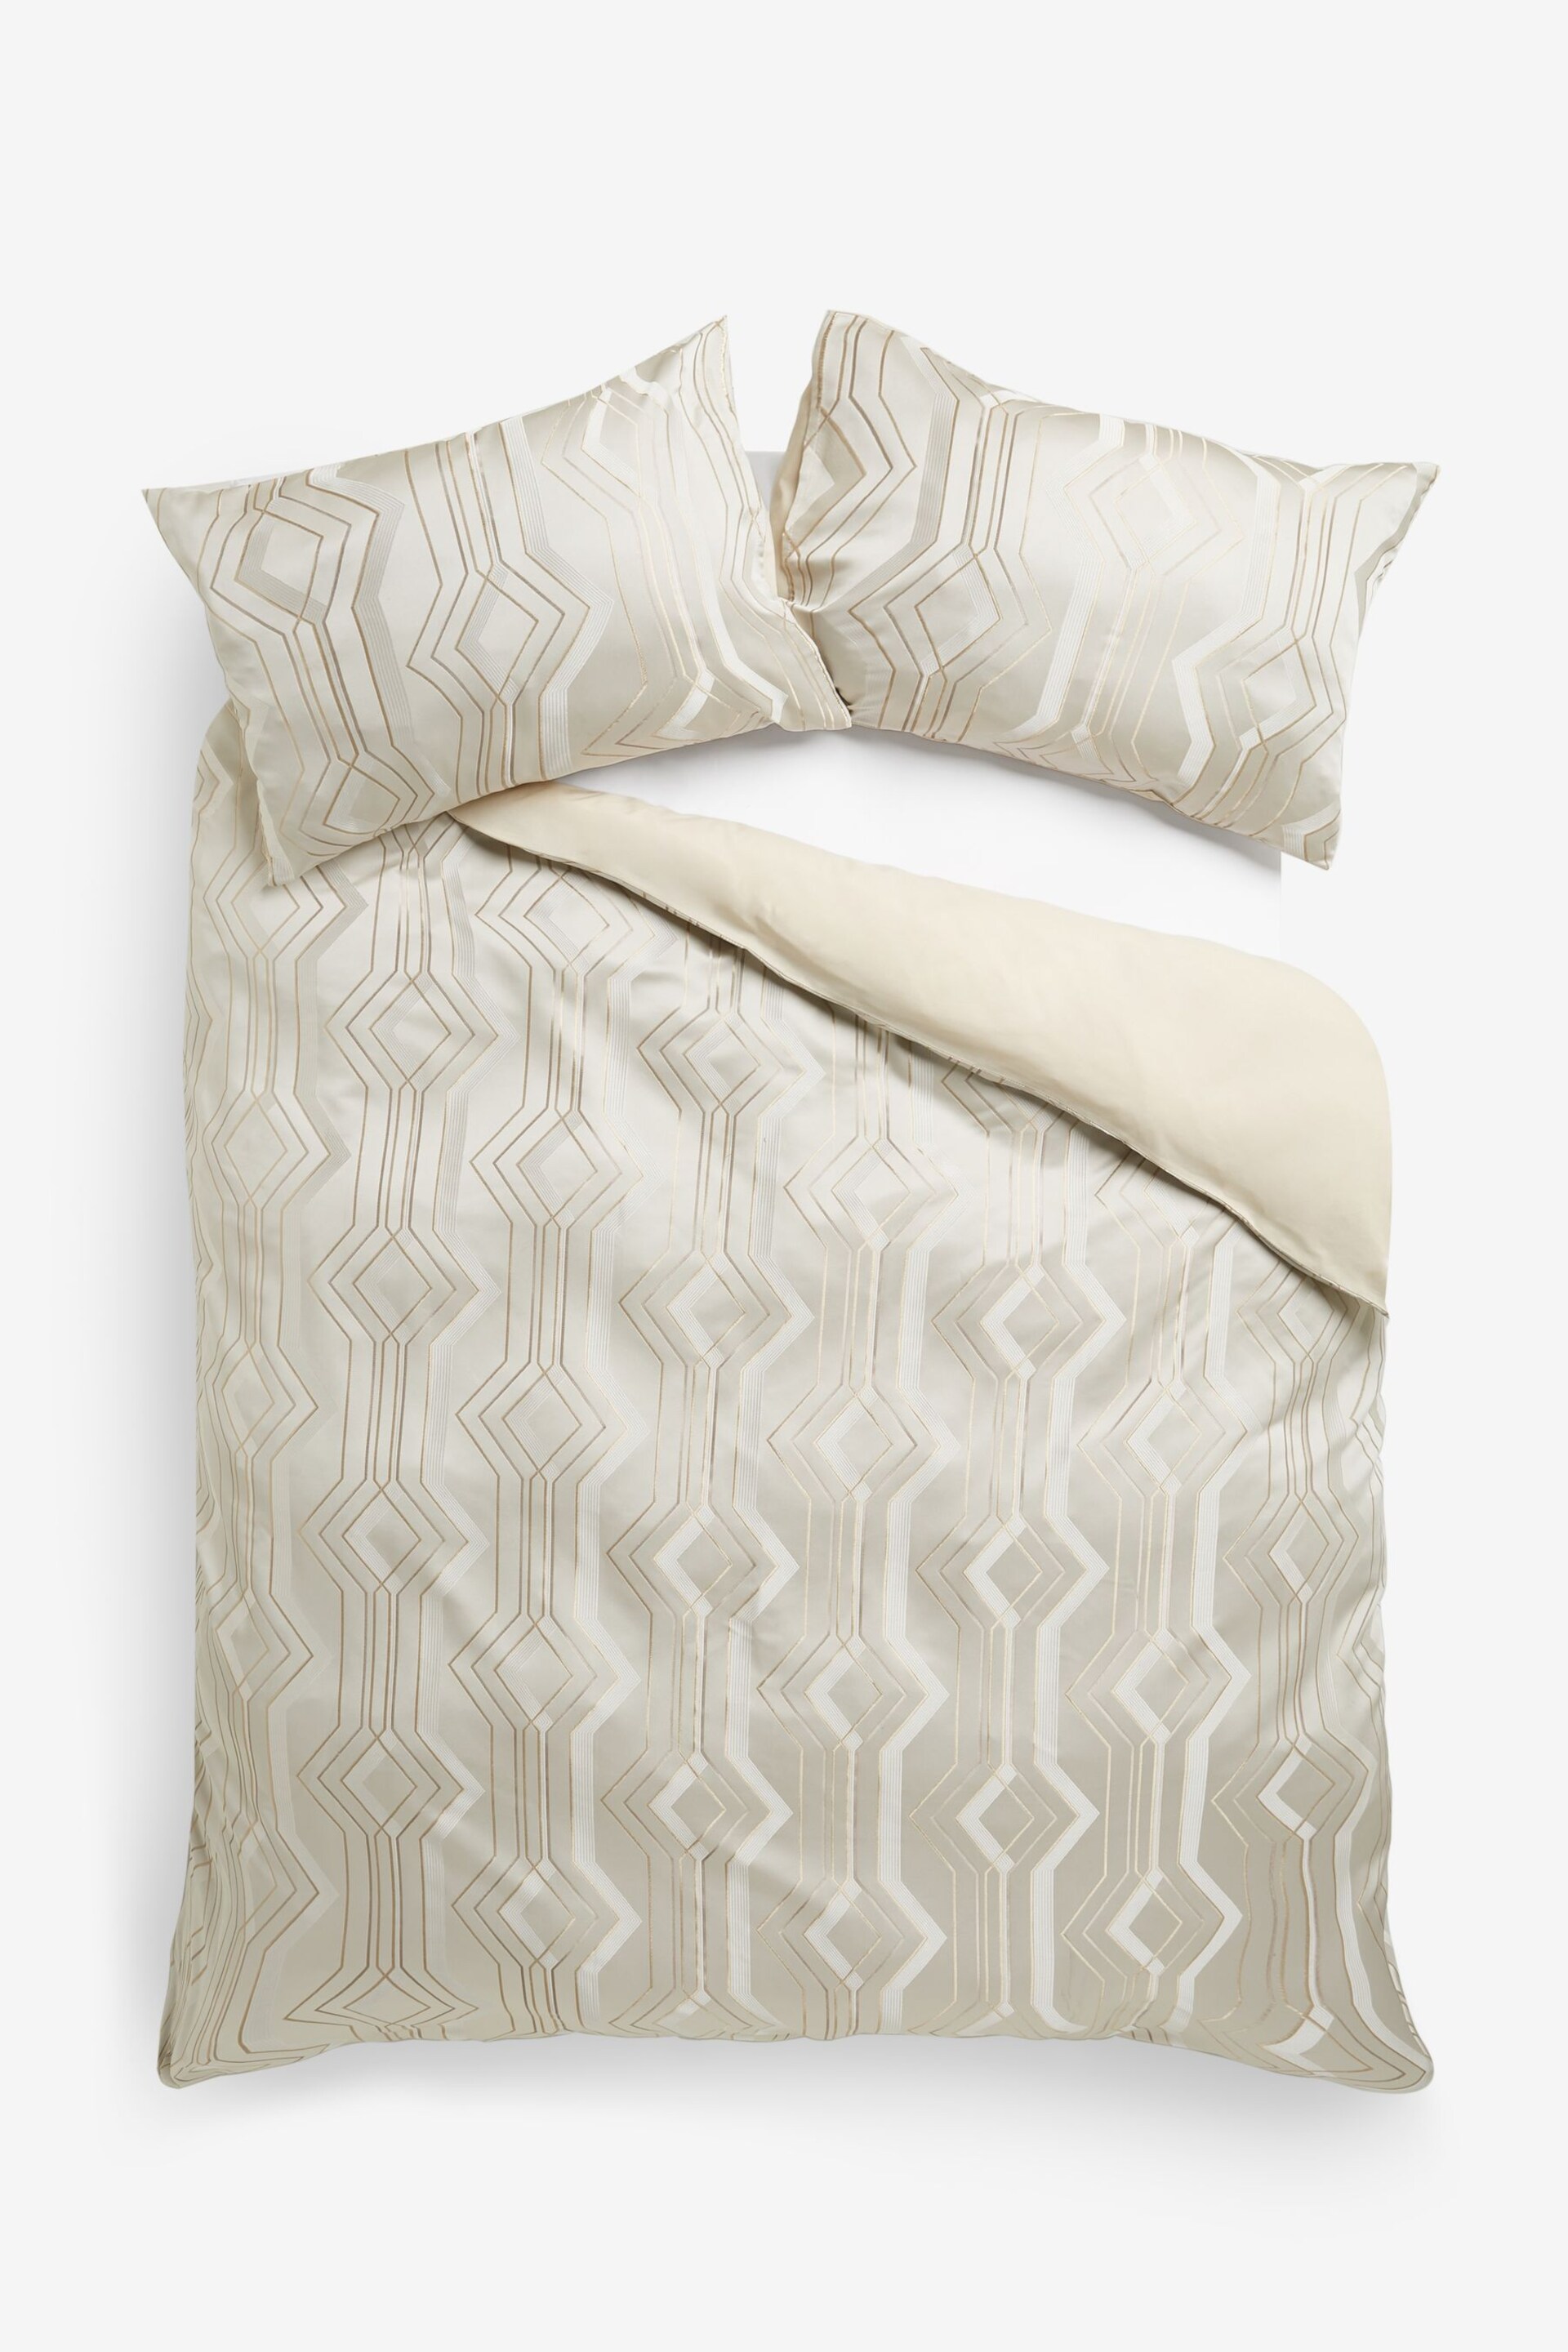 Champagne Geo Jacquard Duvet Cover and Pillowcase Set - Image 4 of 6